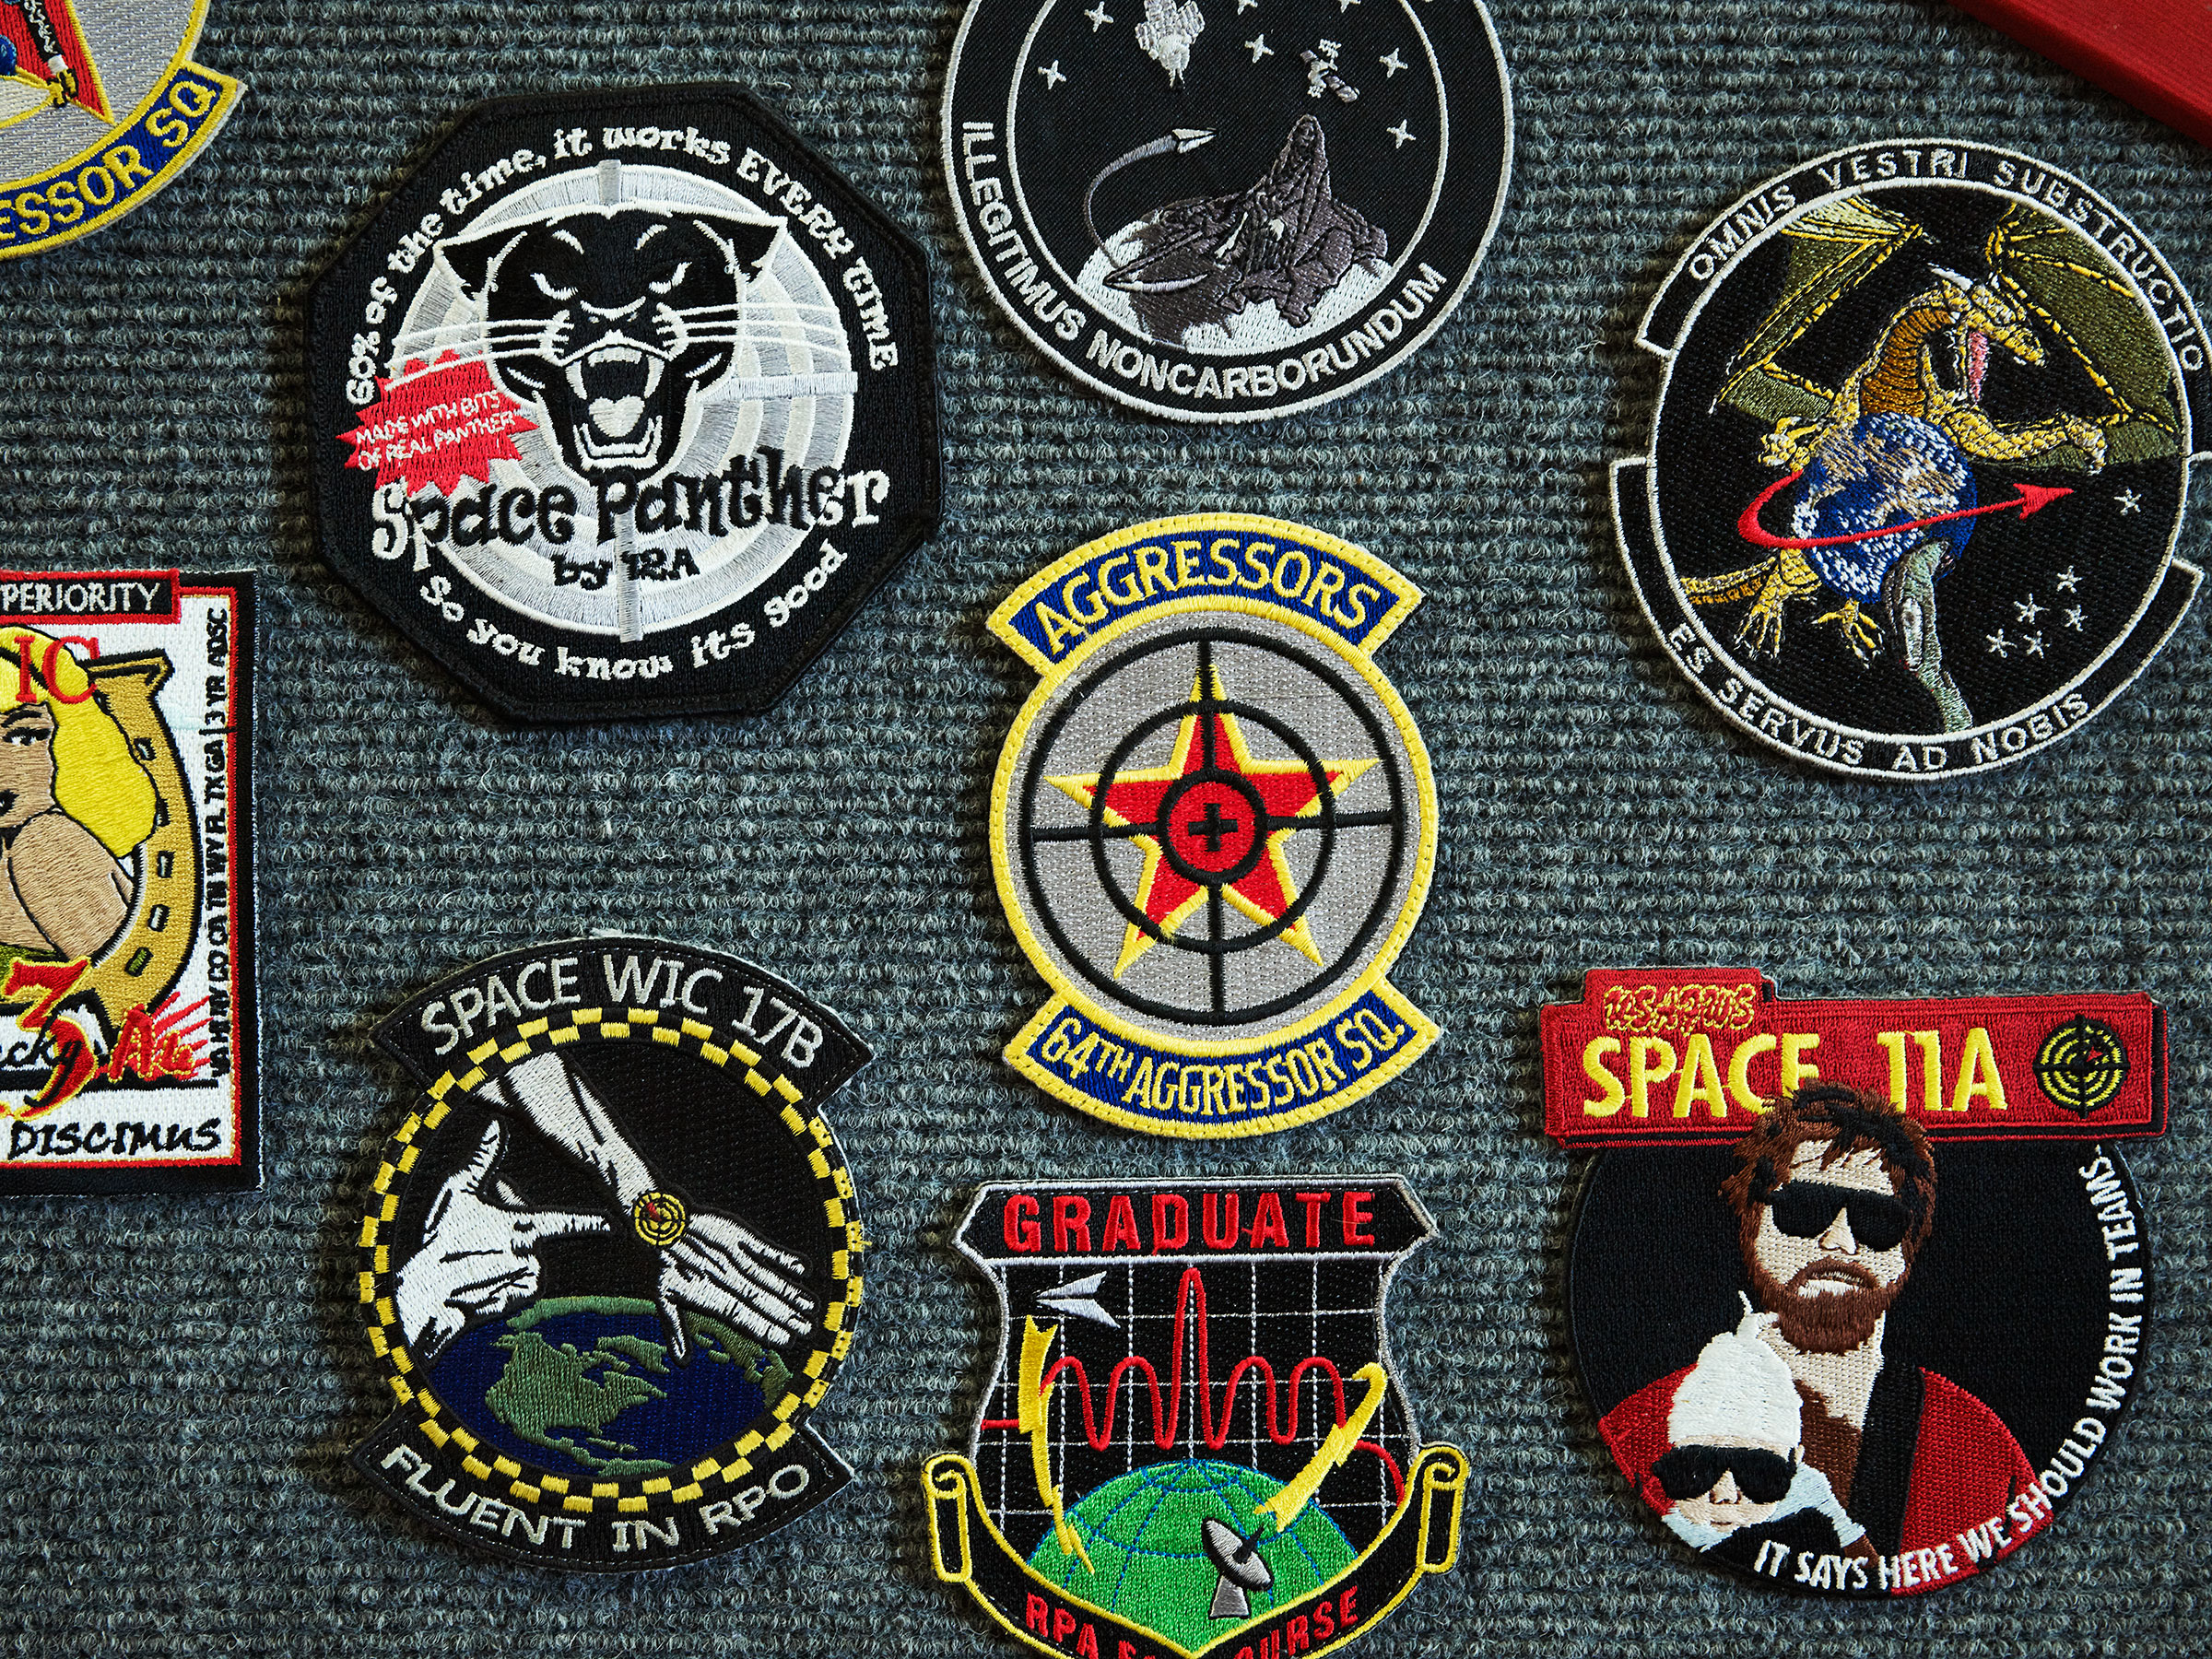 Squadron emblem patches at 527th Space Aggressors Squadron at Schriever Air Force Base in Colorado Springs, Colorado.